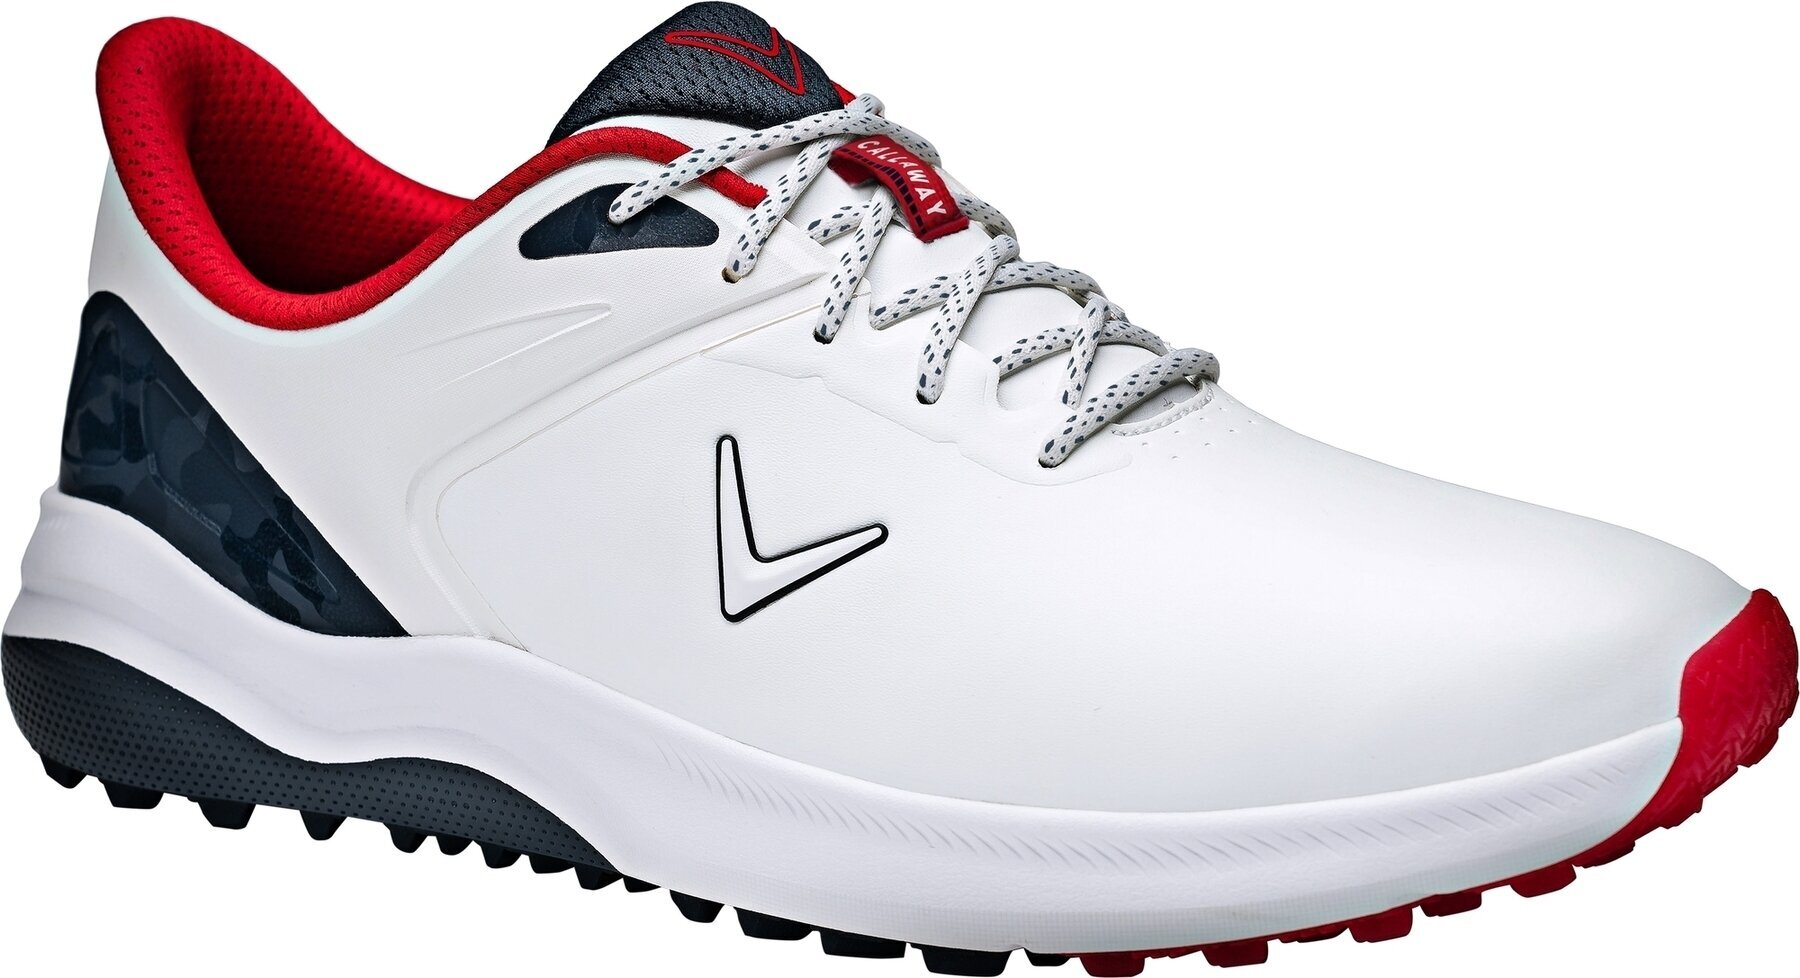 Chaussures de golf pour hommes Callaway Lazer Mens Golf Shoes White/Navy/Red 42,5